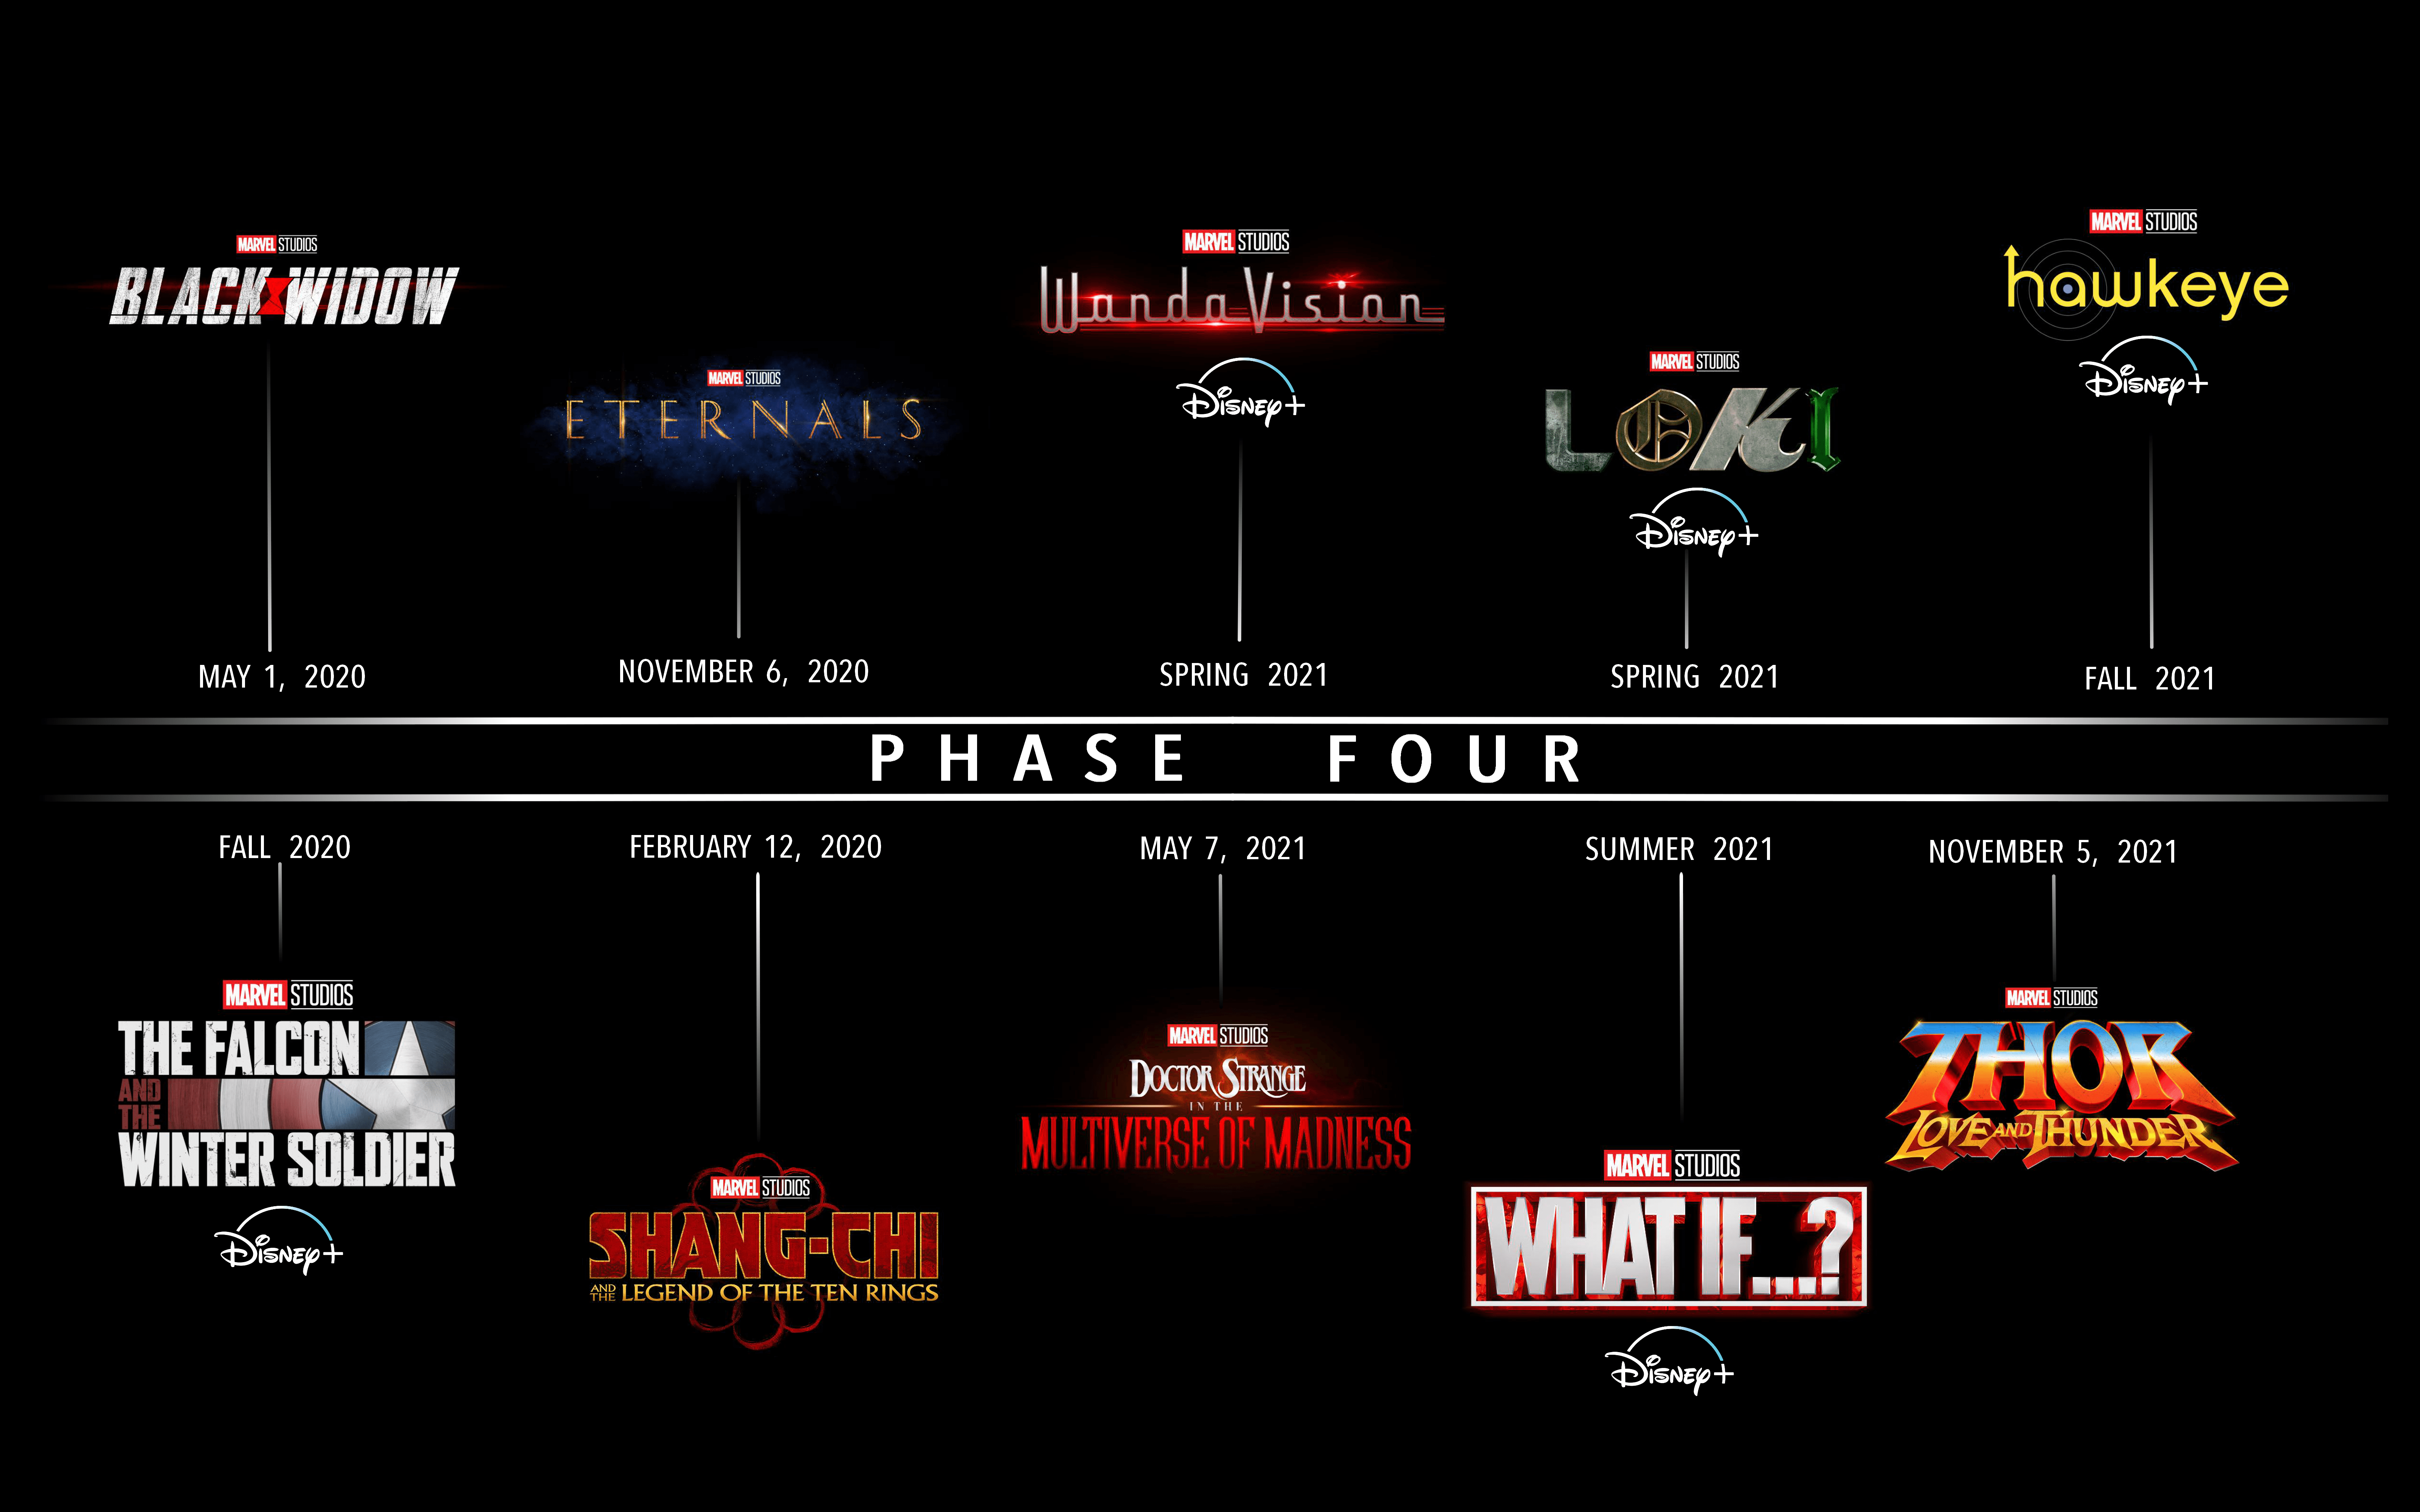 I made an HD version of the phase 4 slate using Marvel's